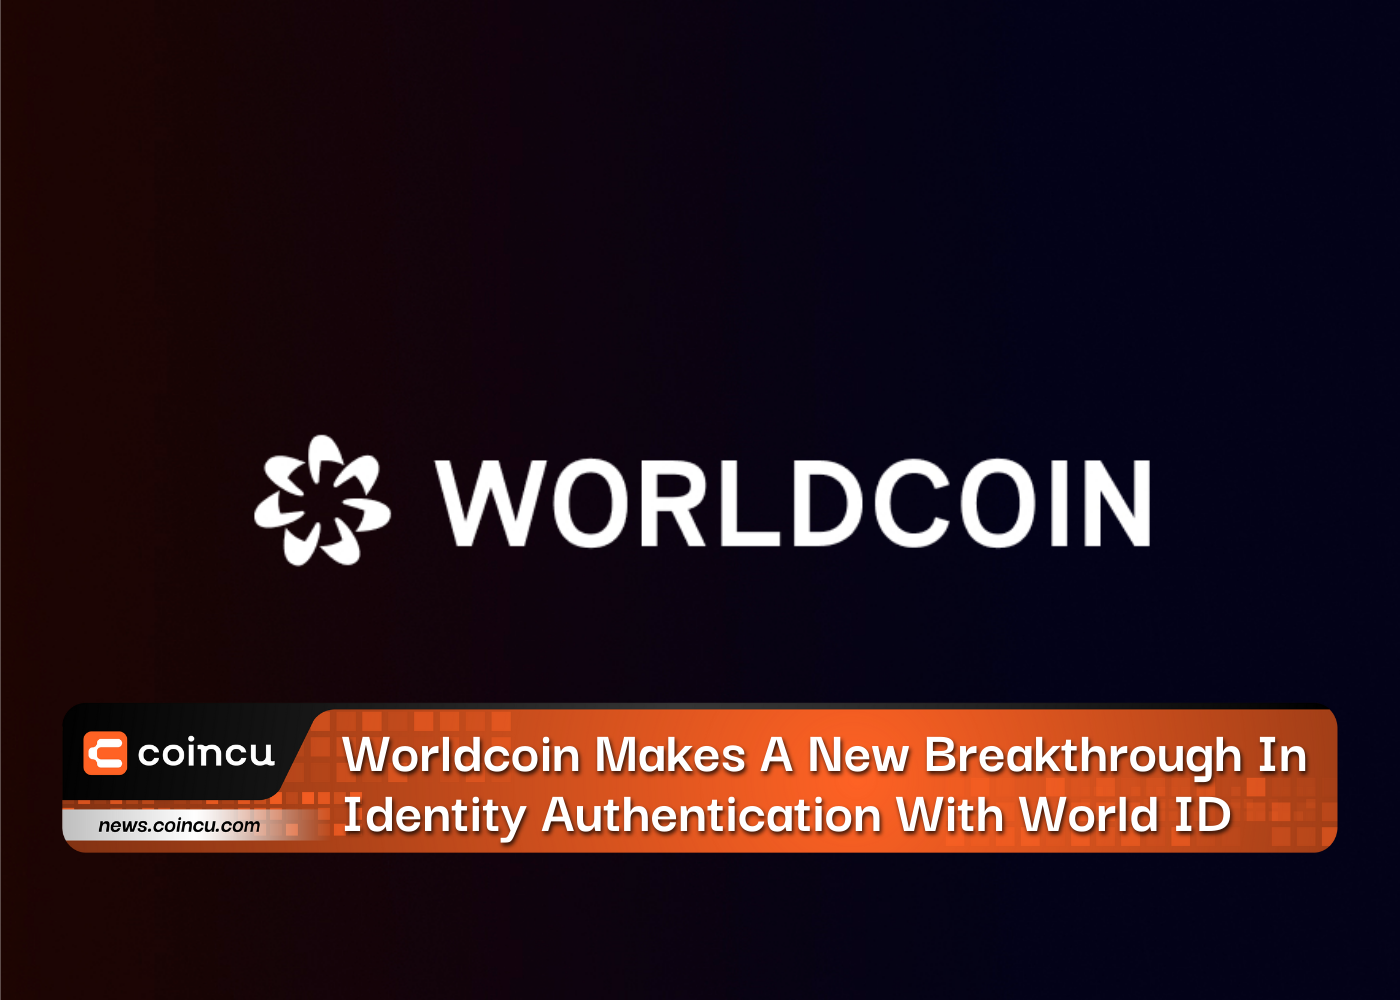 Worldcoin Makes A New Breakthrough In Identity Authentication With World ID